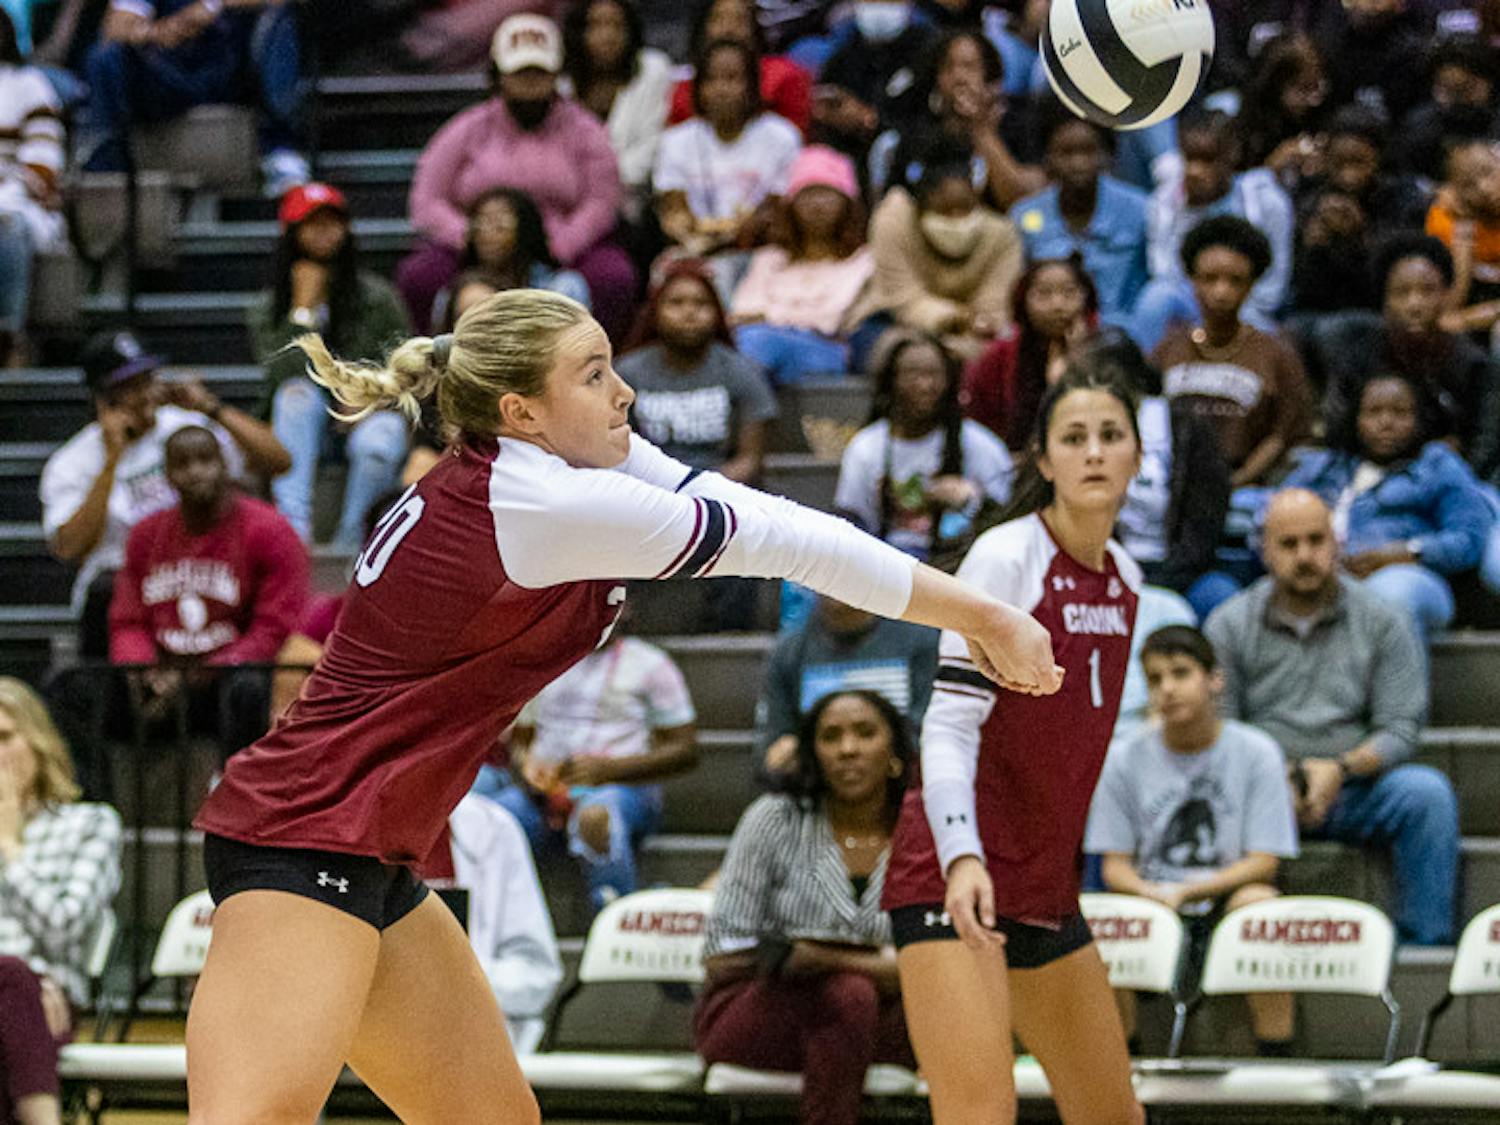 Junior outside hitter Riley Whitesides passes the ball during the matchup between South Carolina and Ole Miss on Nov. 6, 2022. The Gamecocks defeated Ole Miss 3-1.&nbsp;